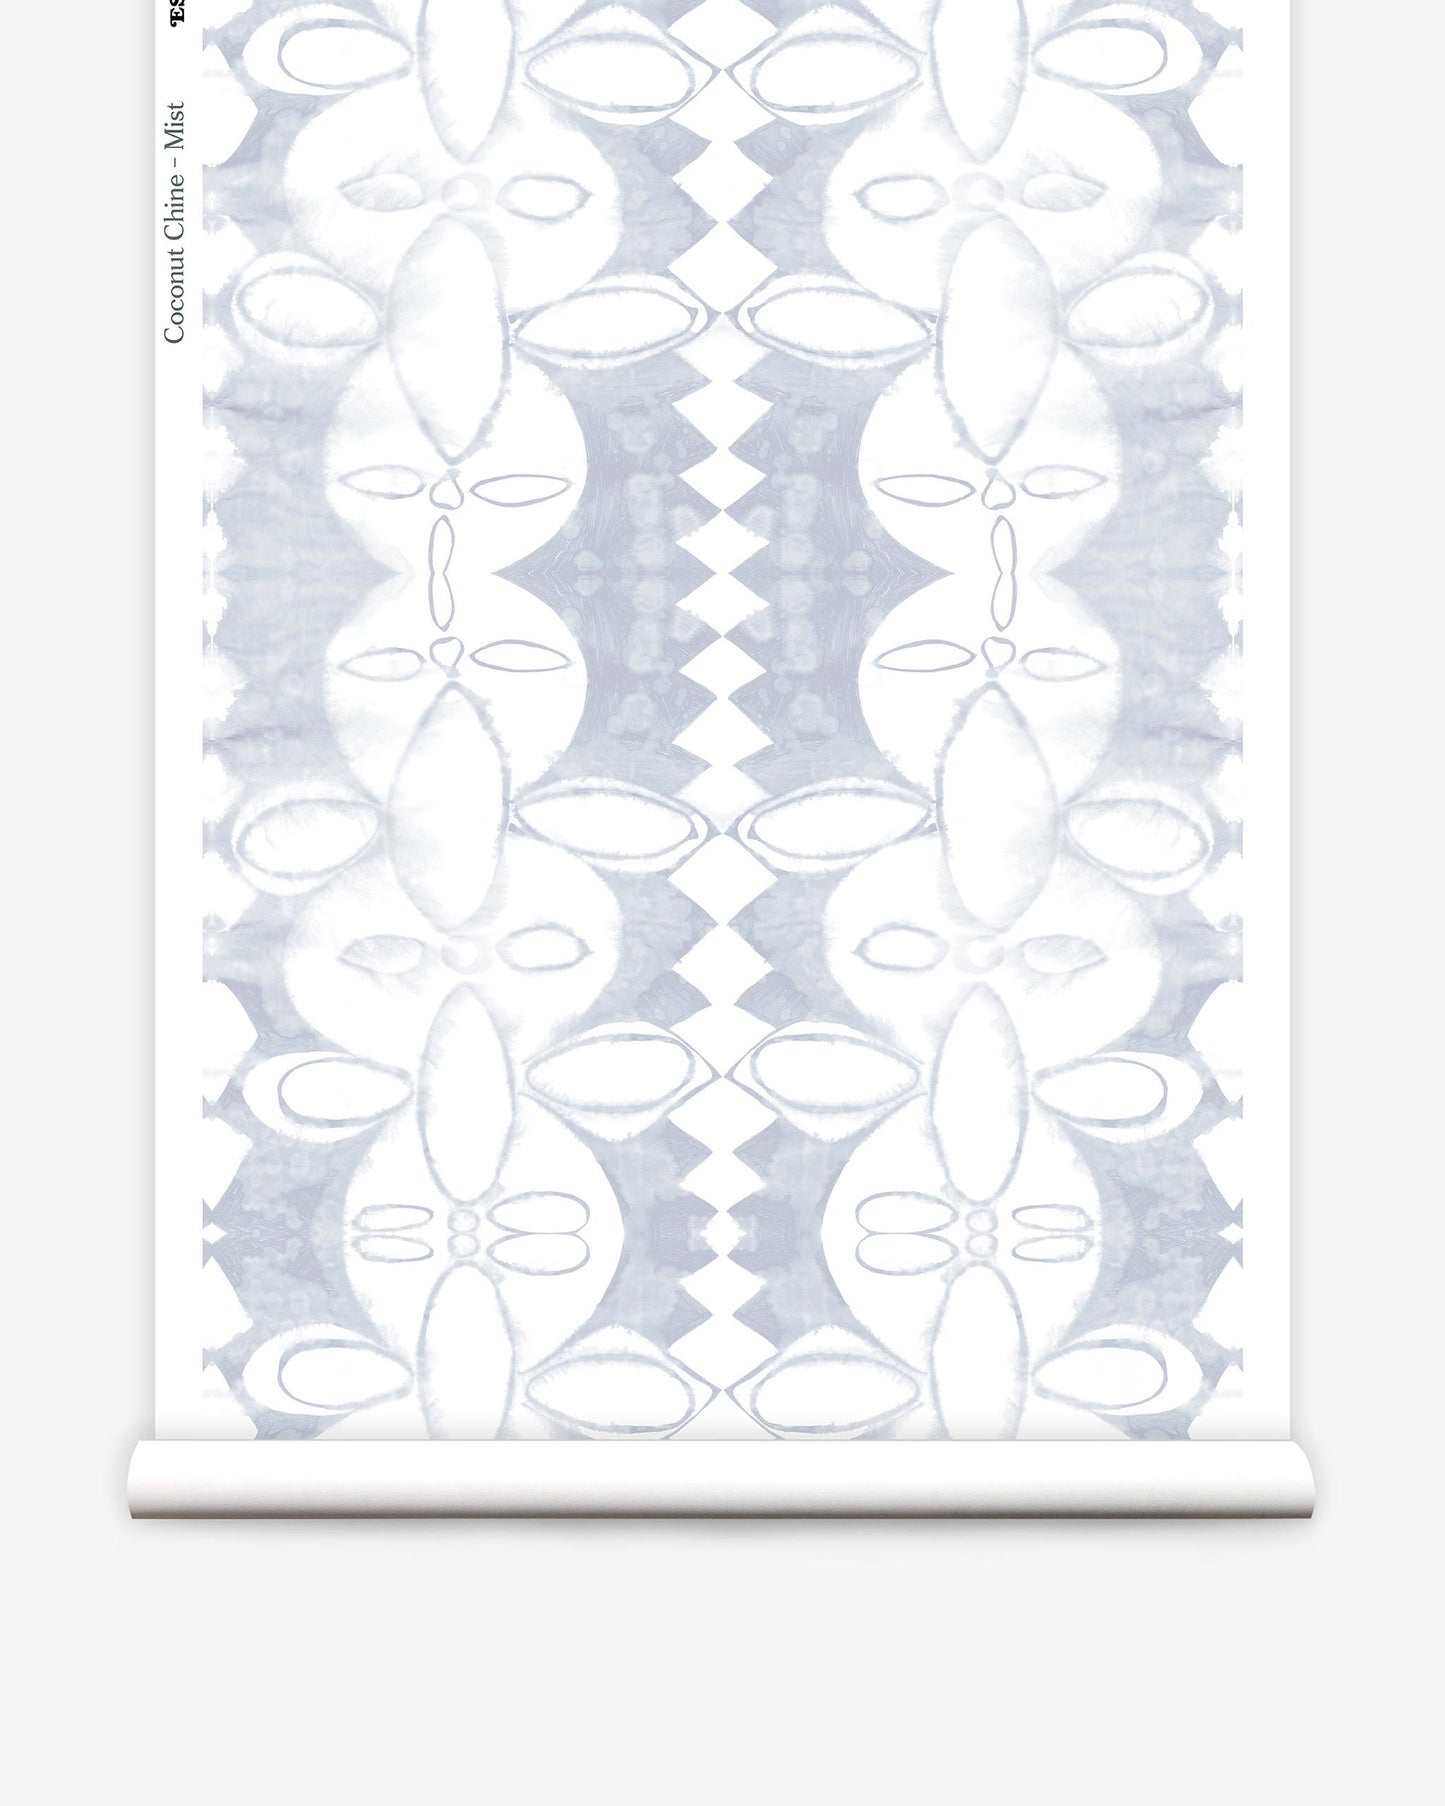 A roll of Coconut Chine Wallpaper||Mist with an abstract design on it.